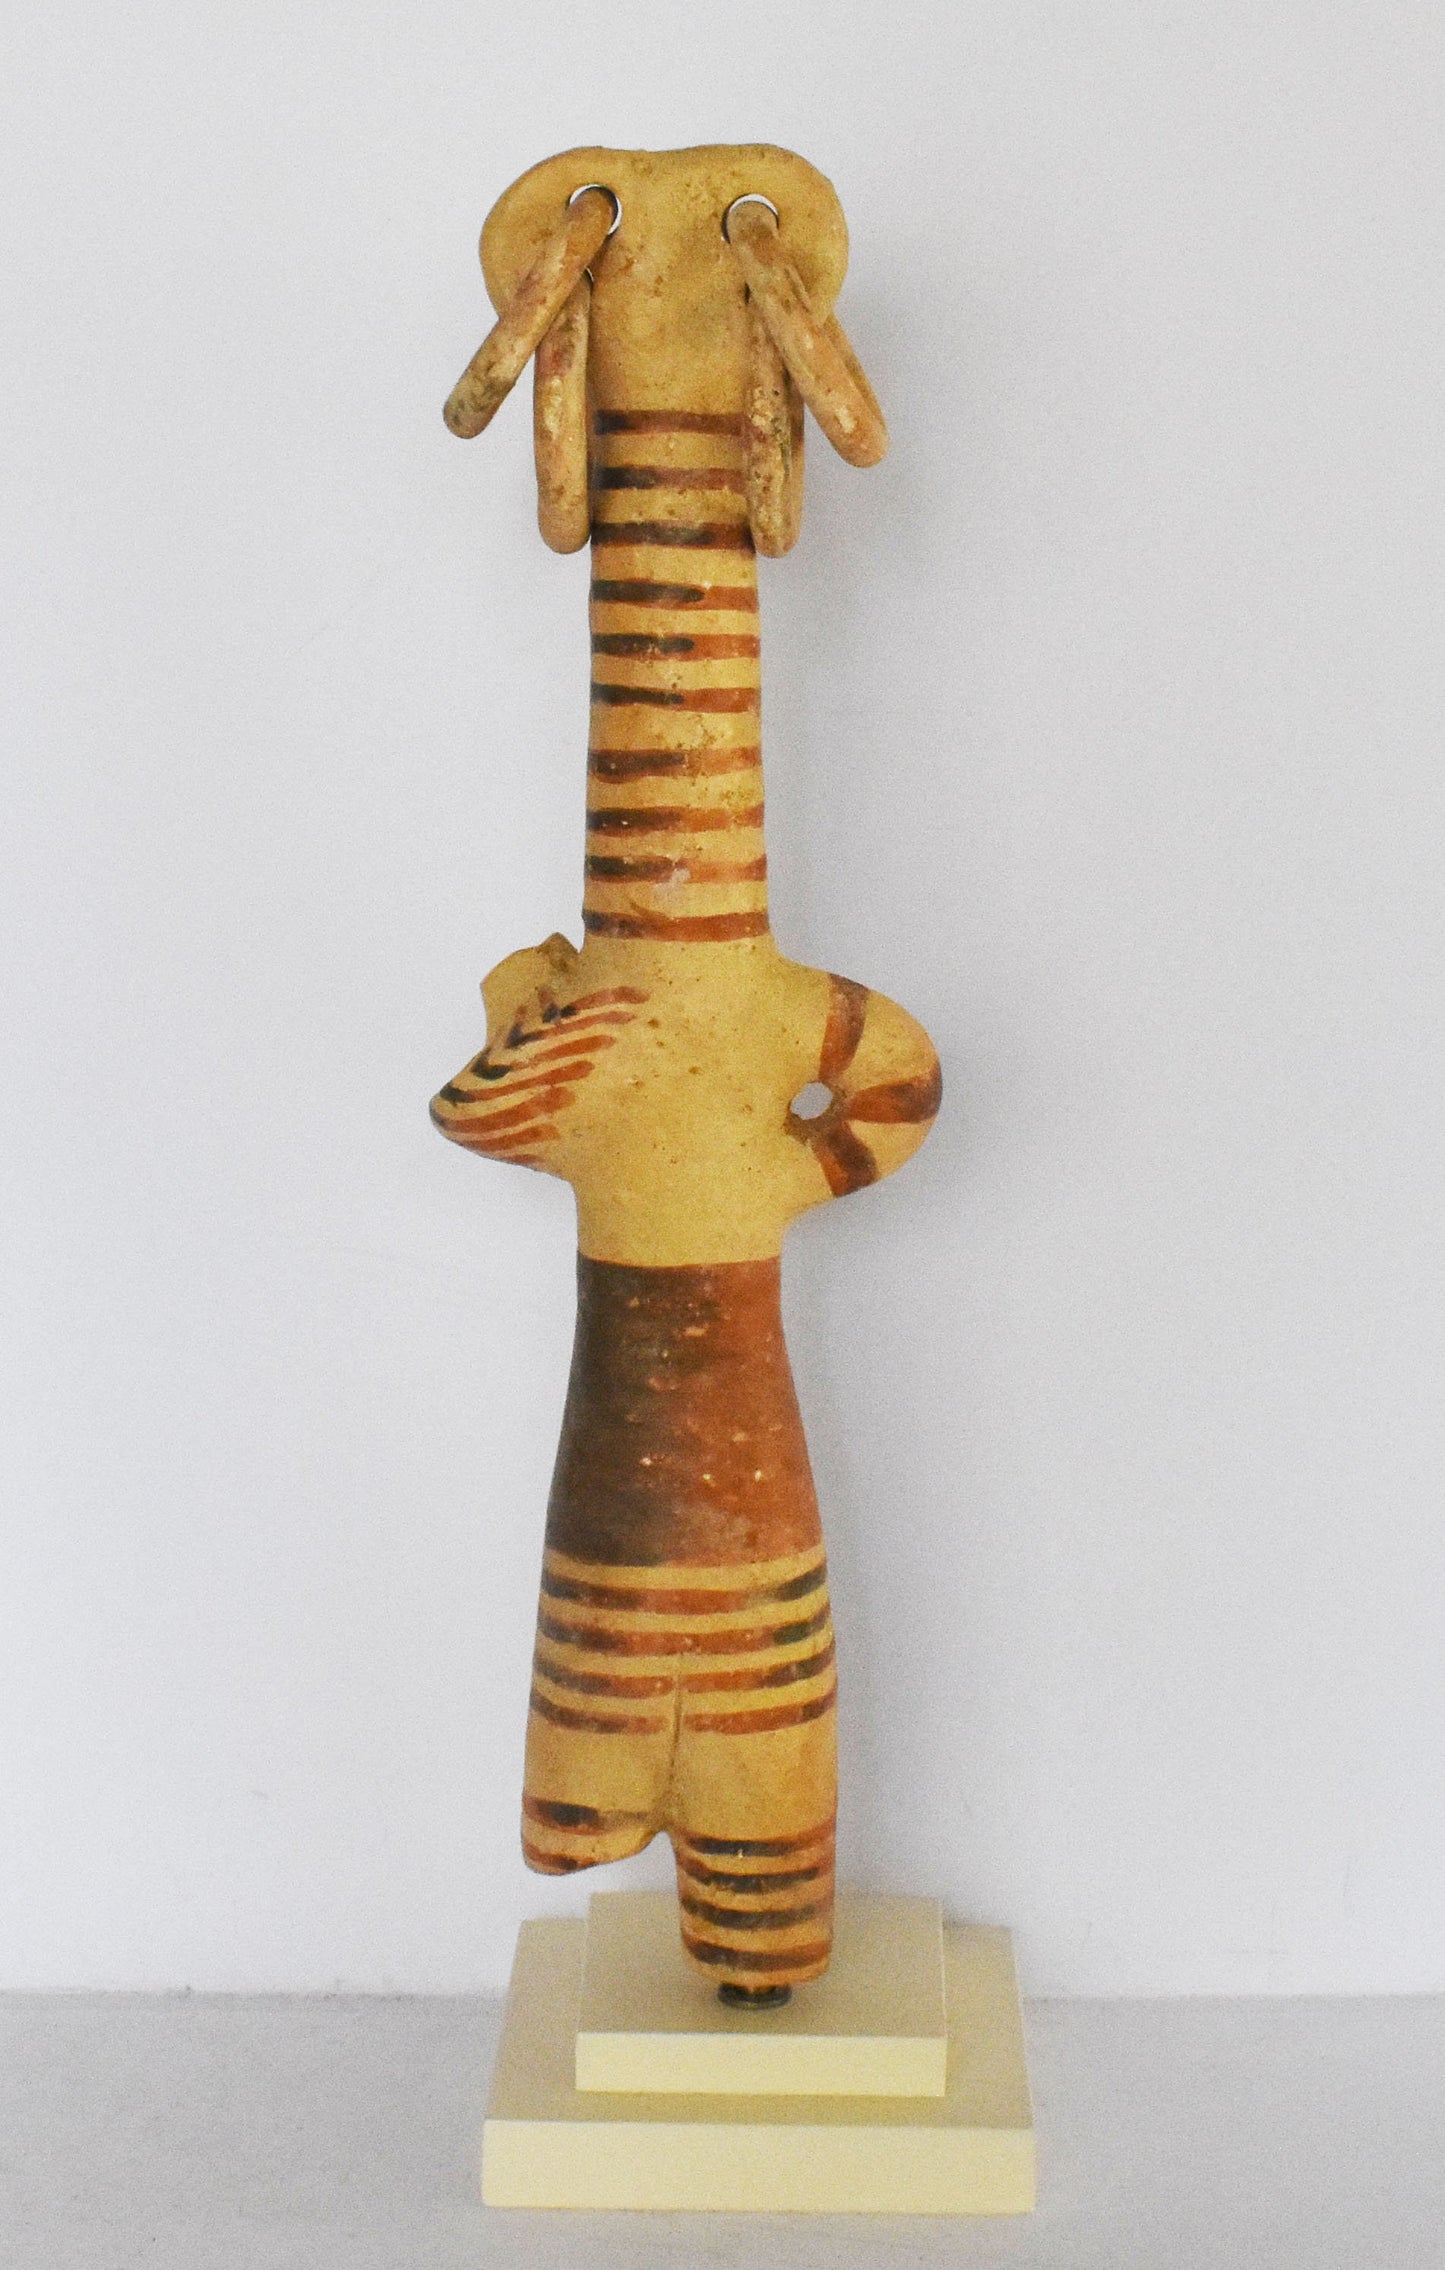 Male Tubular Idol - From Cyprus - 1900-1650 BC - Pierides Museum - Reproduction - Ceramic Artifact